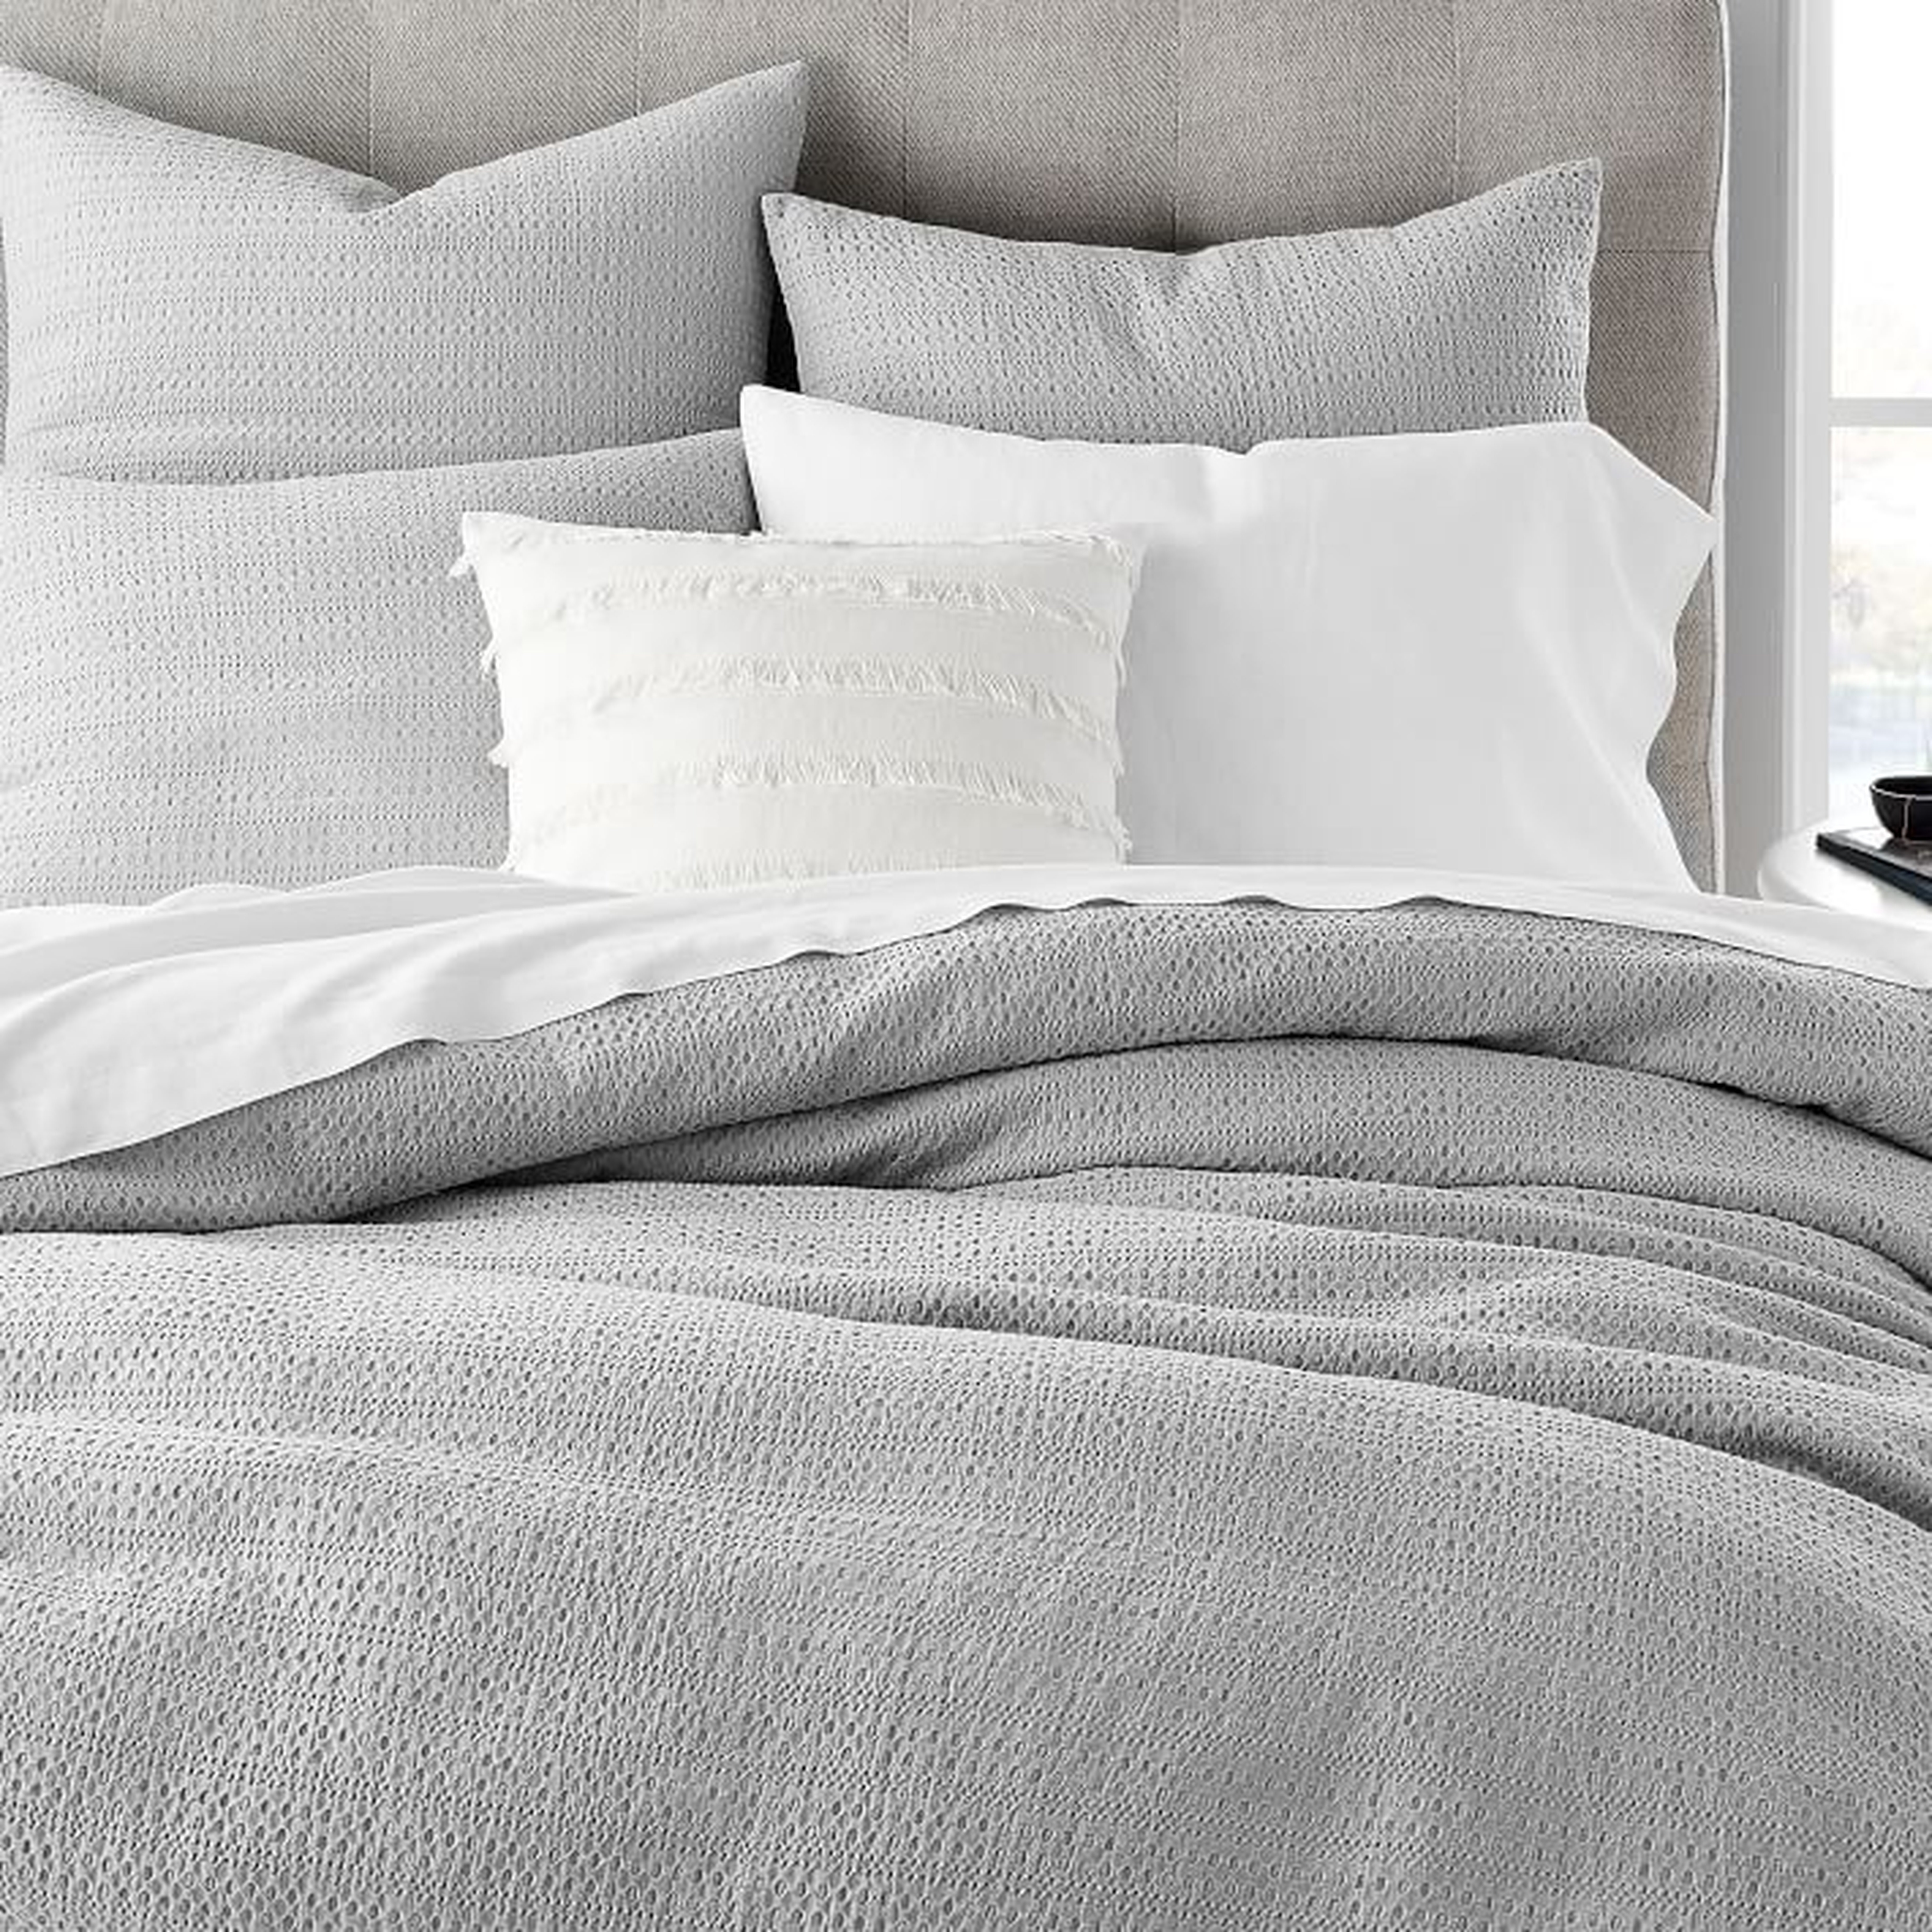 Organic Textured Waffle Duvet Cover, King/Cal. King, Stone Gray - West Elm